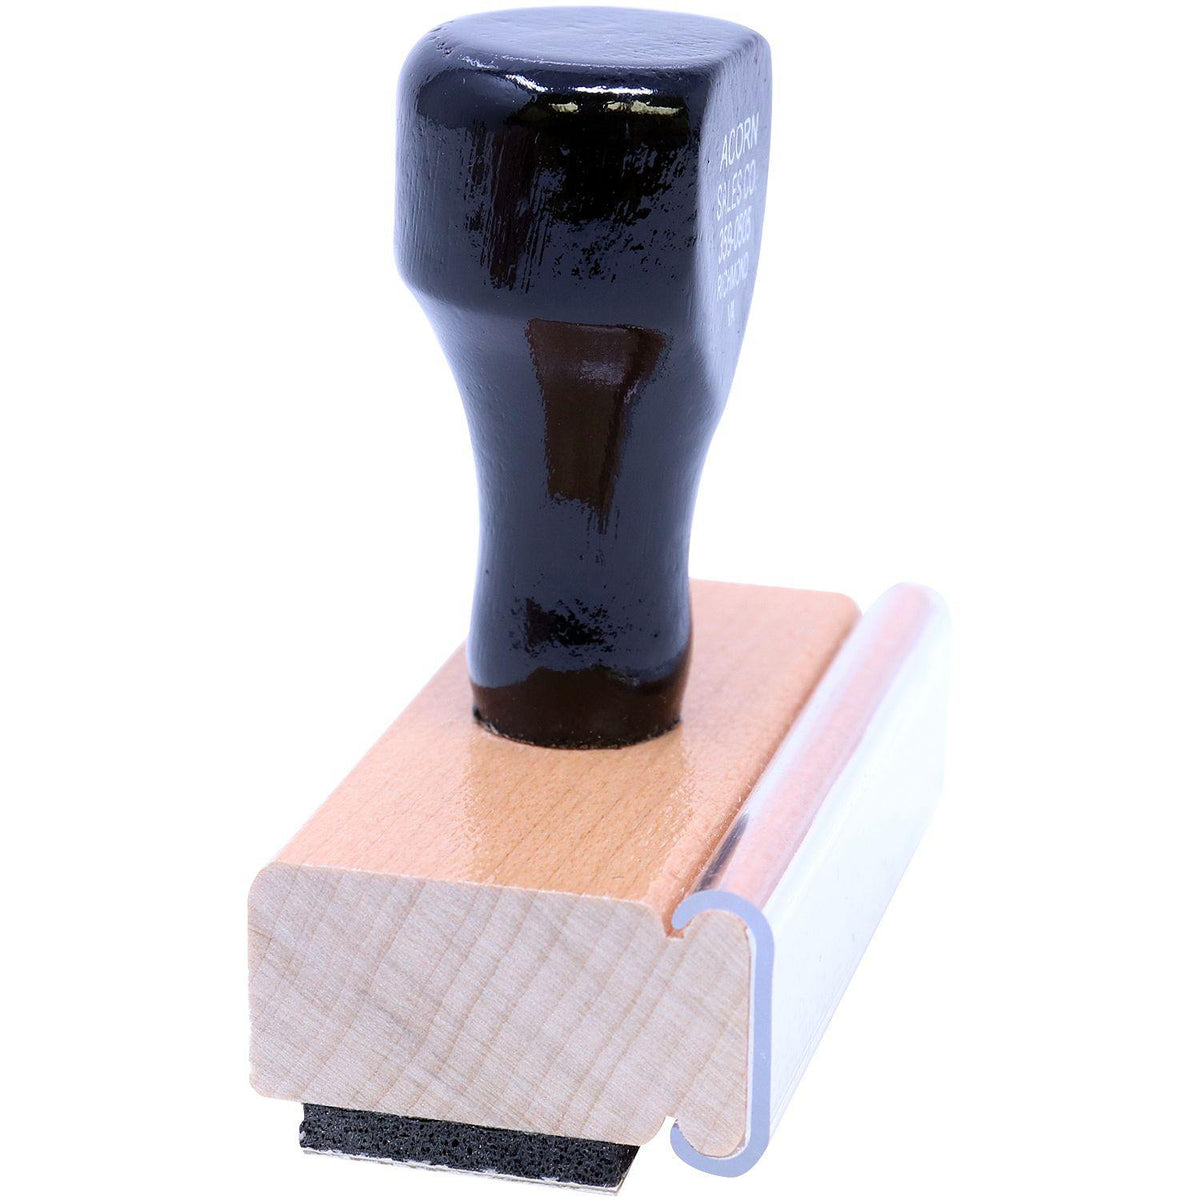 Side View of Large Rough Draft Rubber Stamp at an Angle